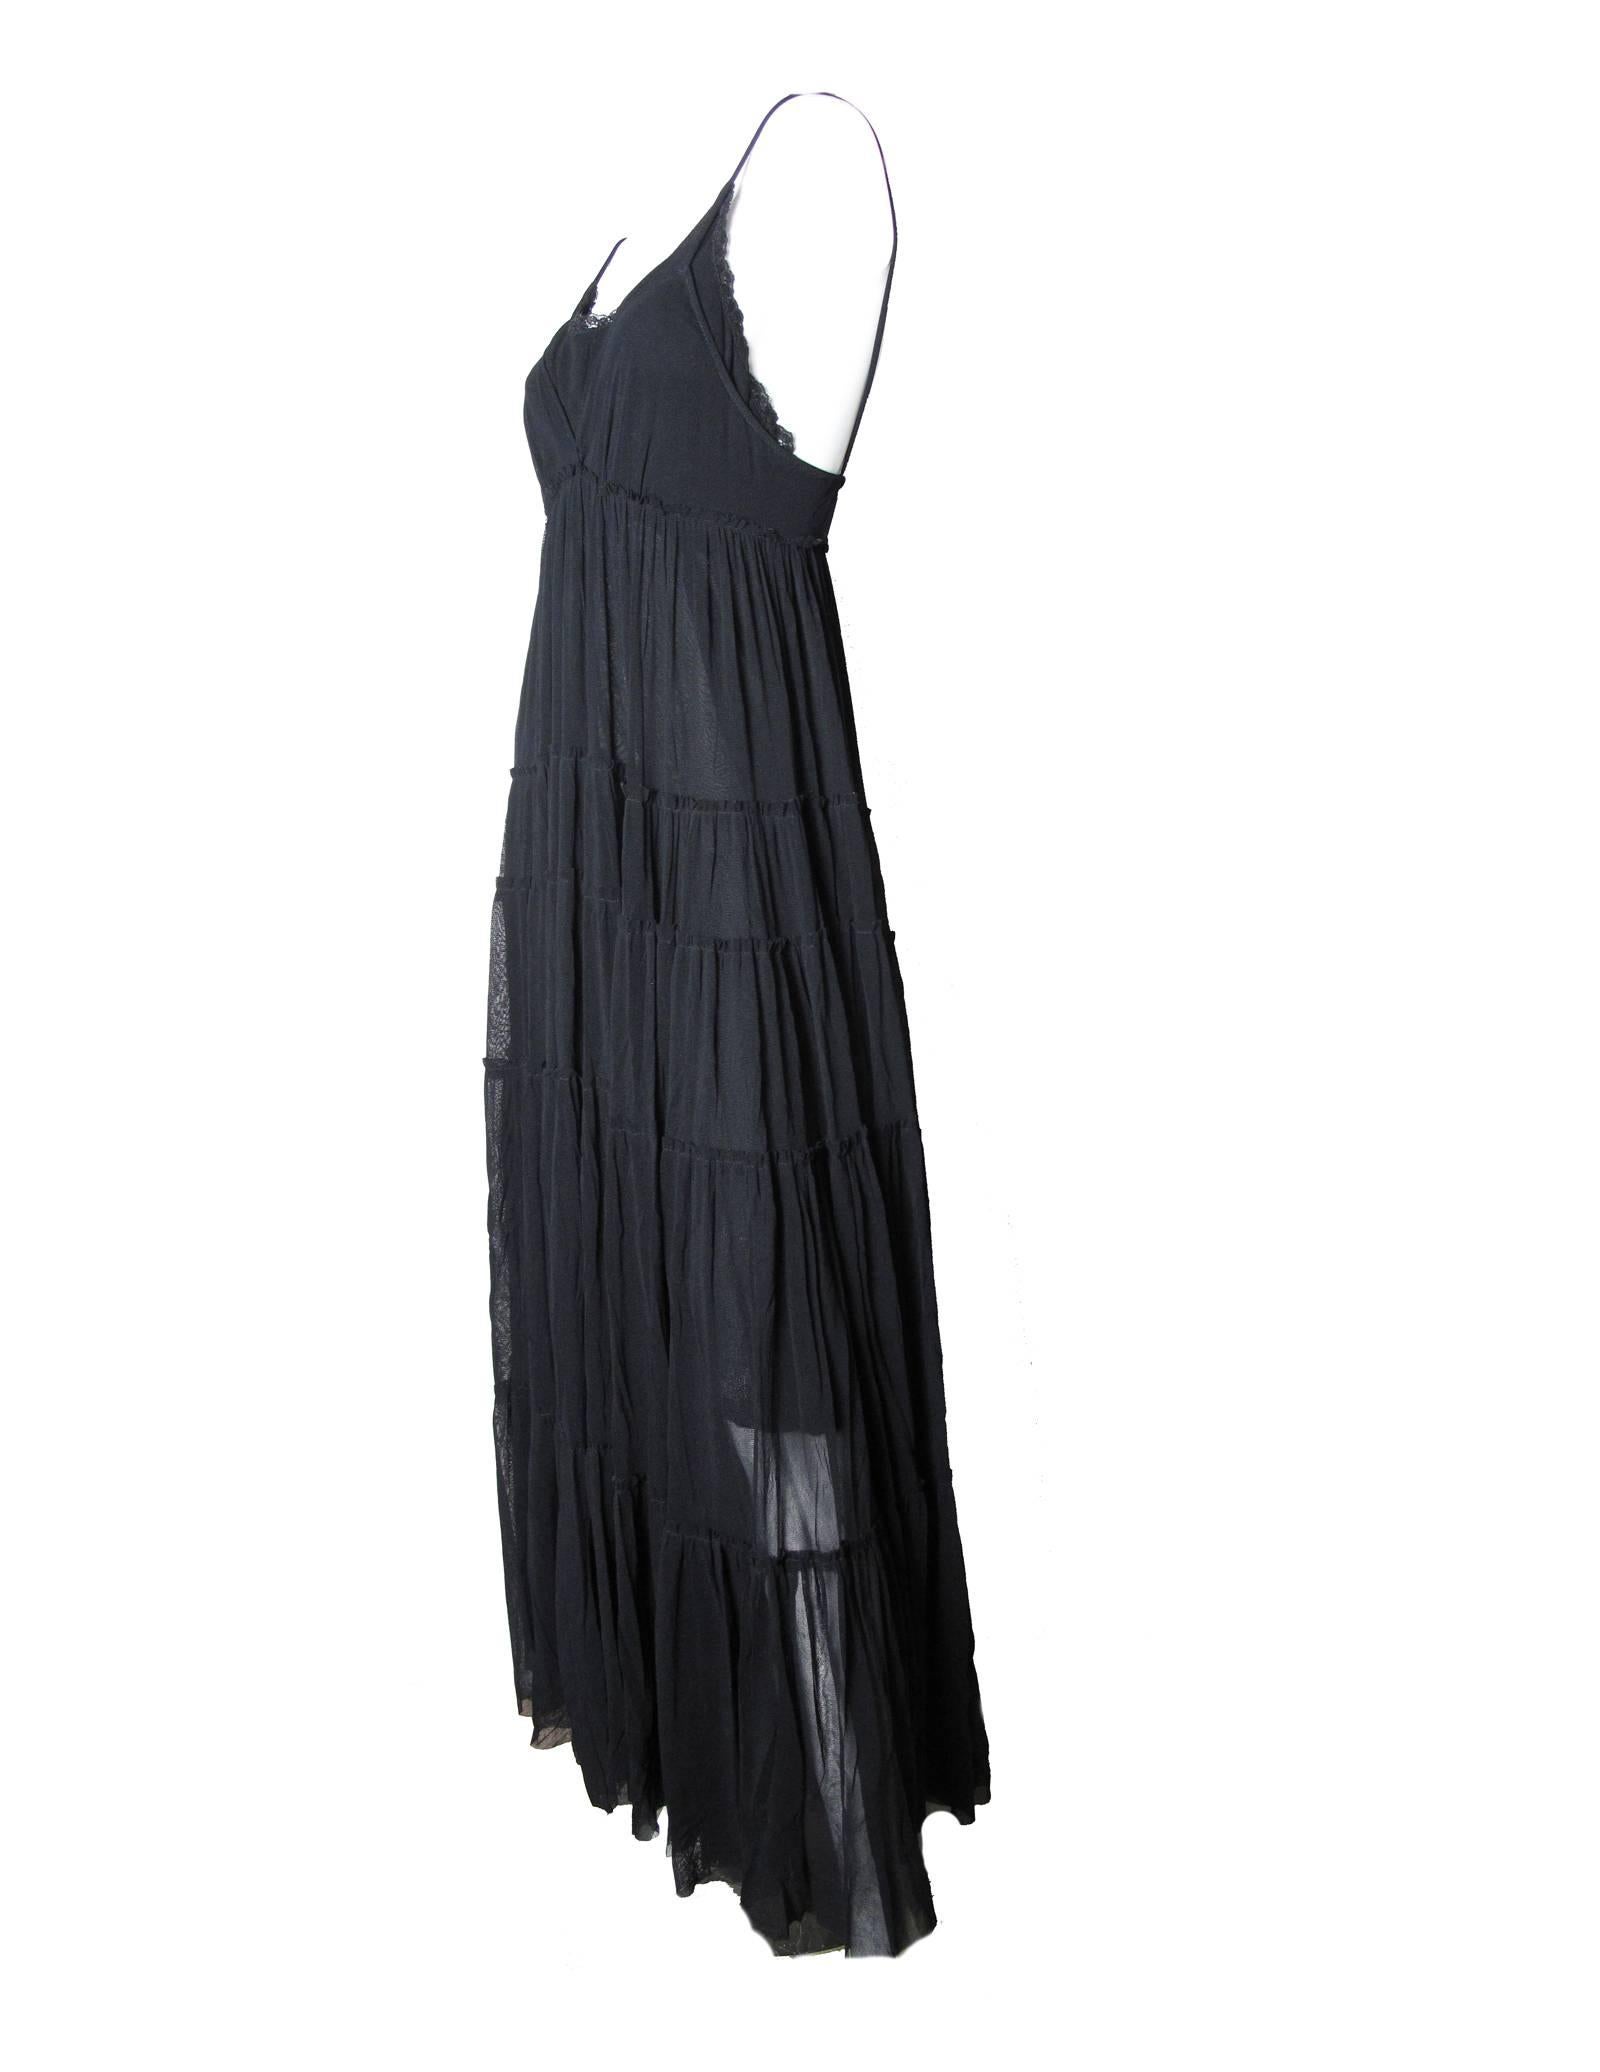 Jean Paul Gaultier long black sheer mesh gown with spaghetti straps and lace trim at collar.  Nylon fabric. Fabric is stretchy. Condition: Excellent Size L

We accept returns for refund, please see our terms. We offer free ground shipping within